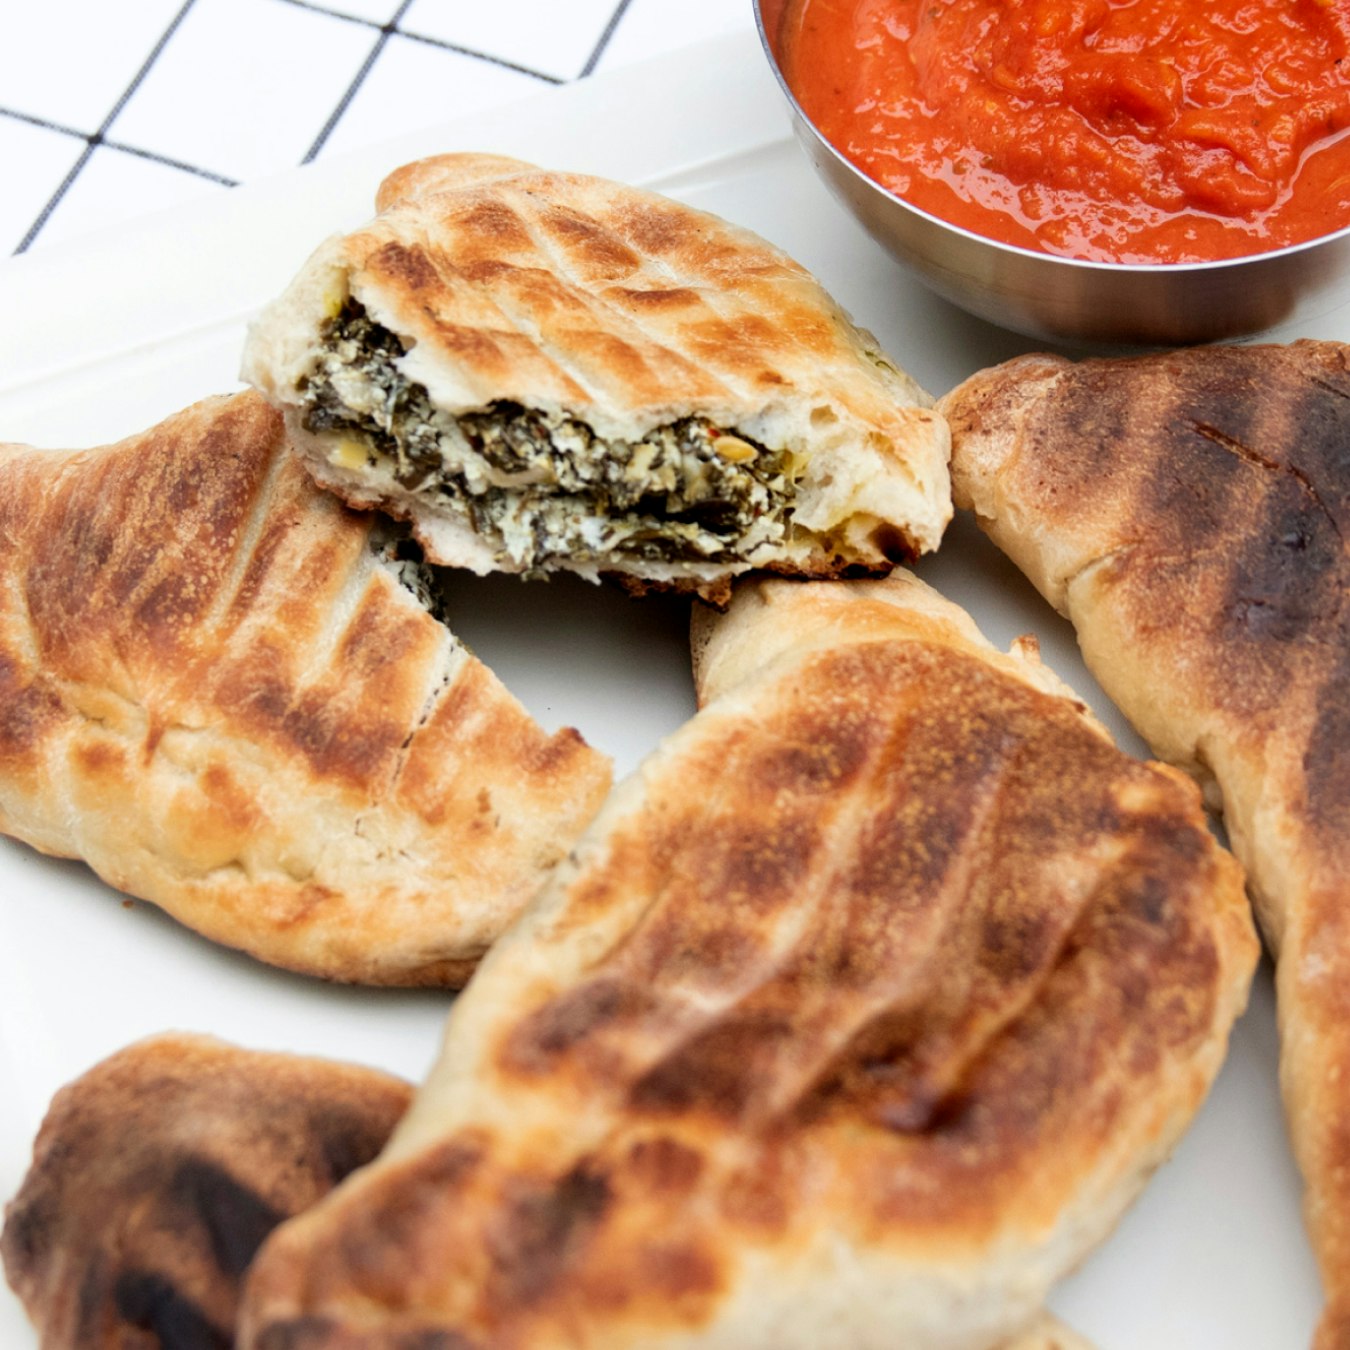 View item GRILLED SPINACH ARTICHOKE CALZONES